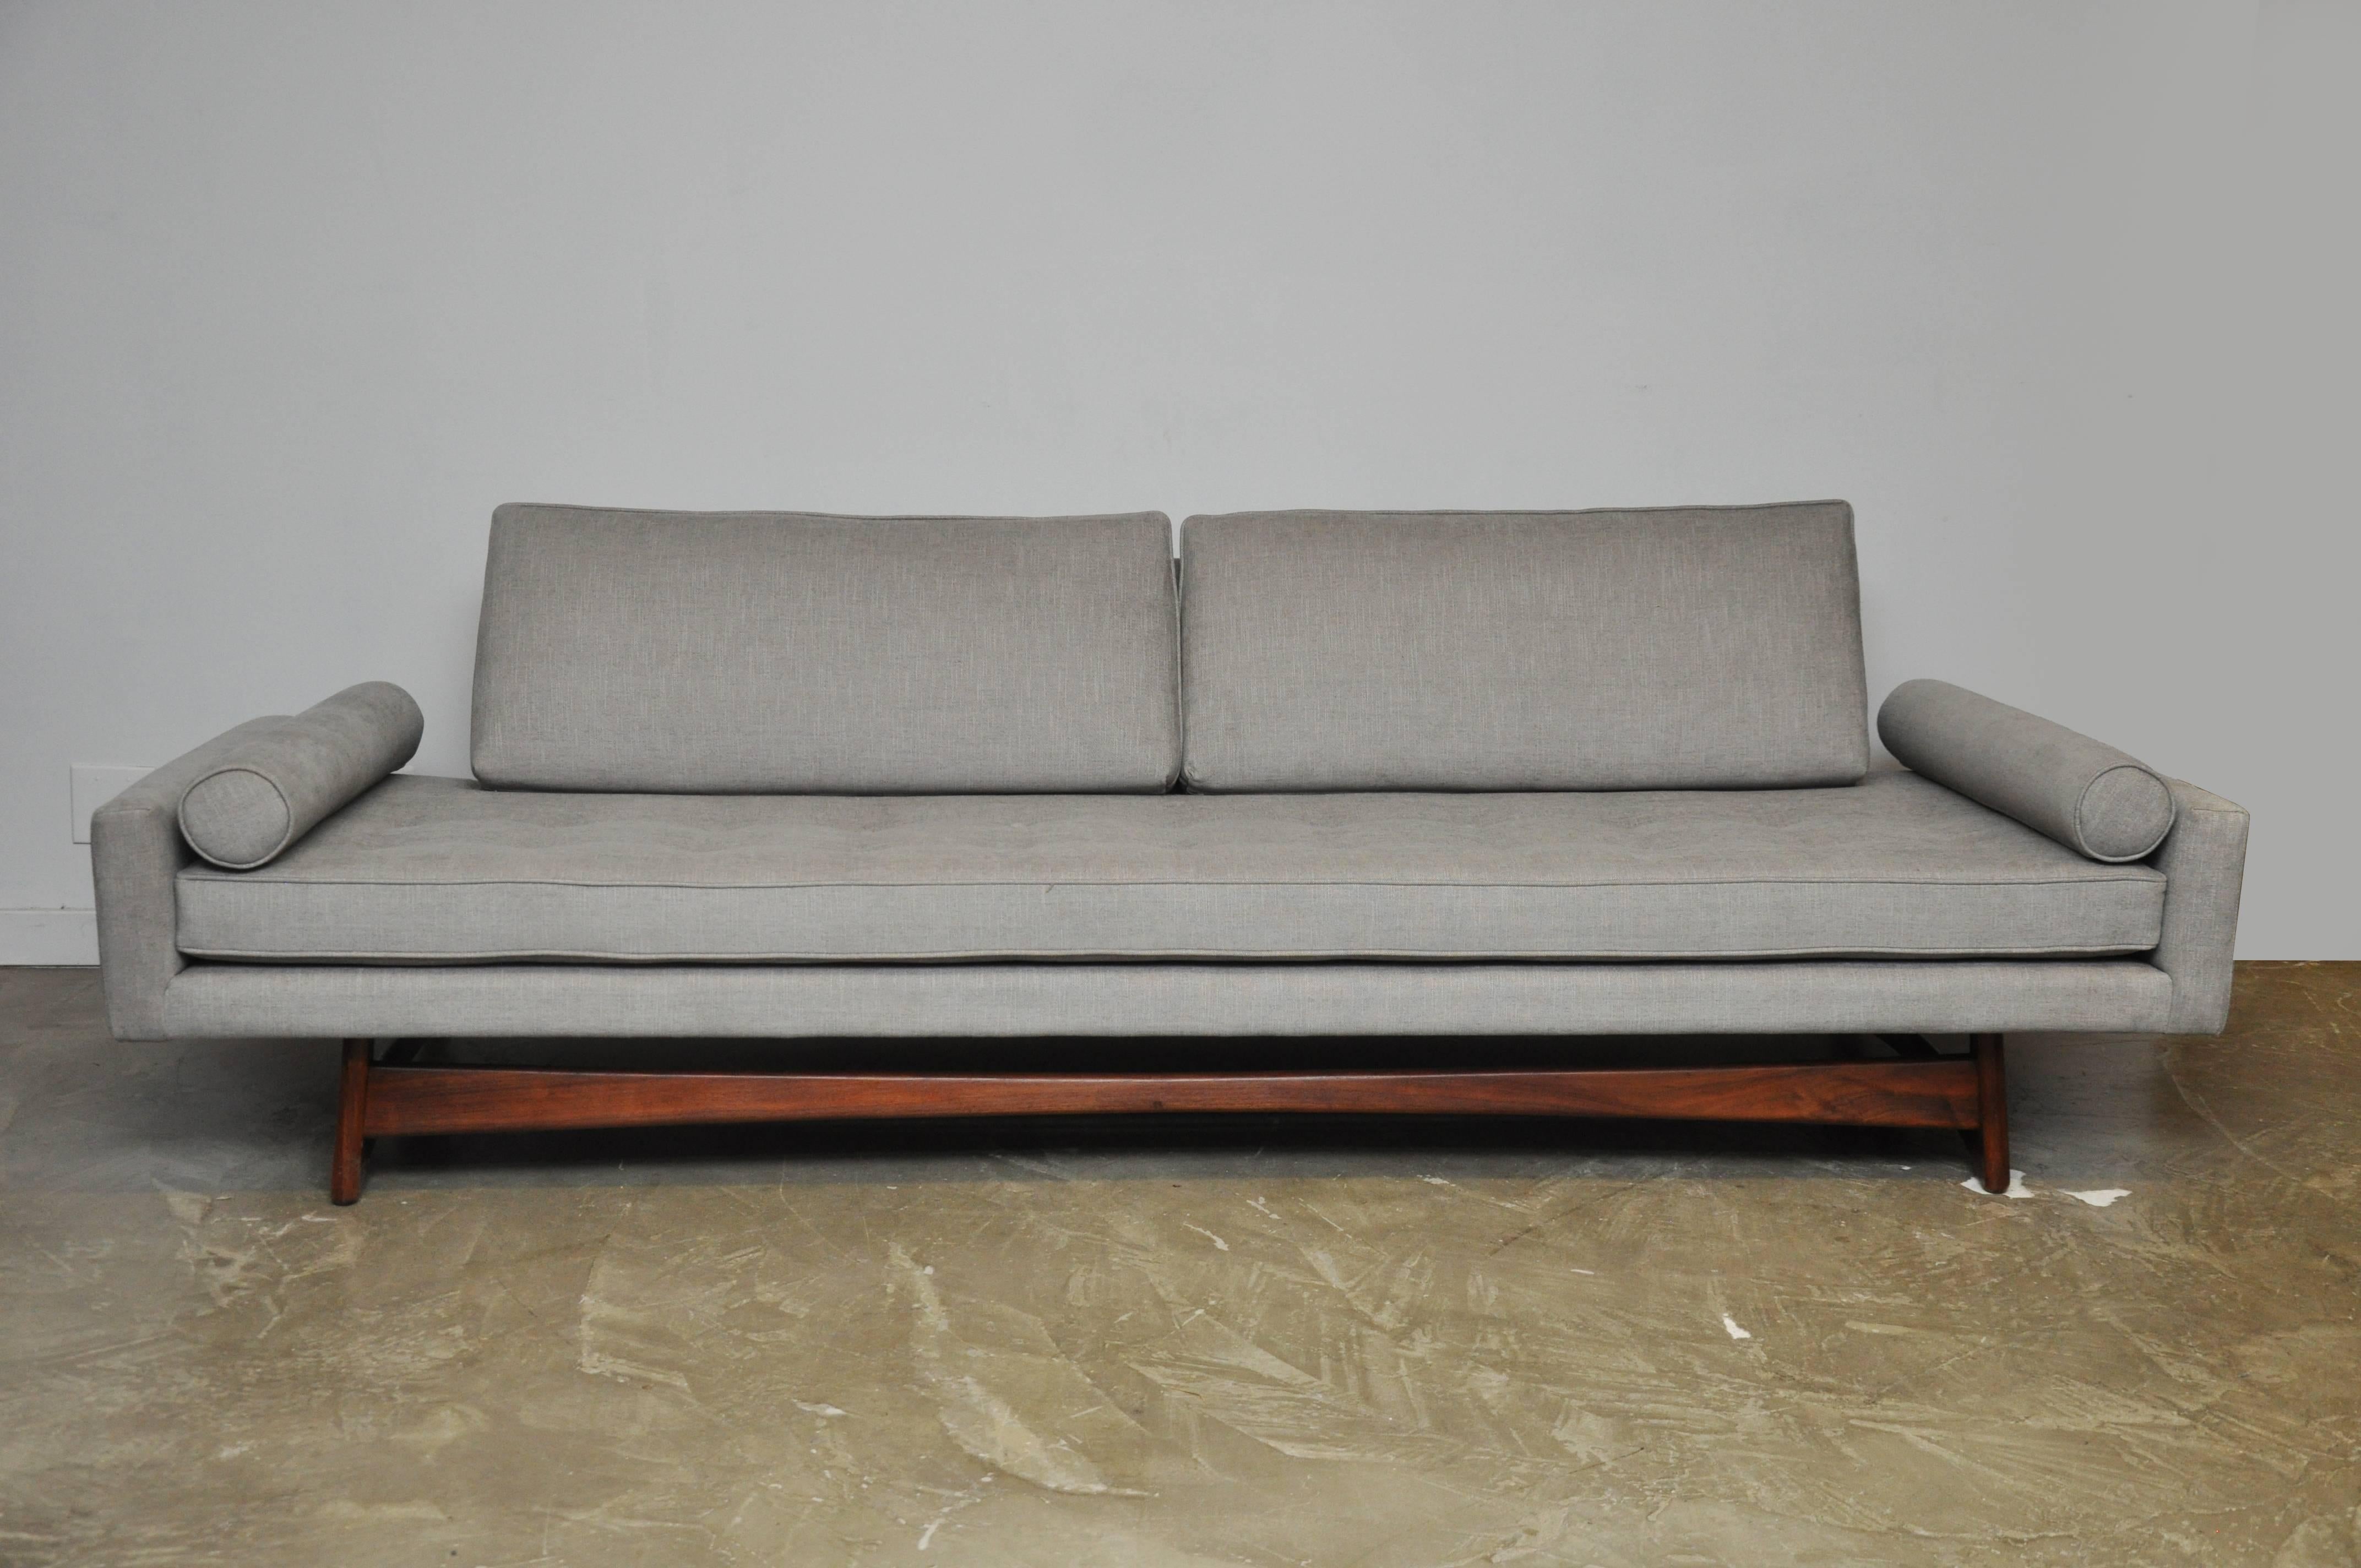 This fully restored Gondola sofa by Adrian Pearsall. Refinished sculptural walnut base with new upholstery.